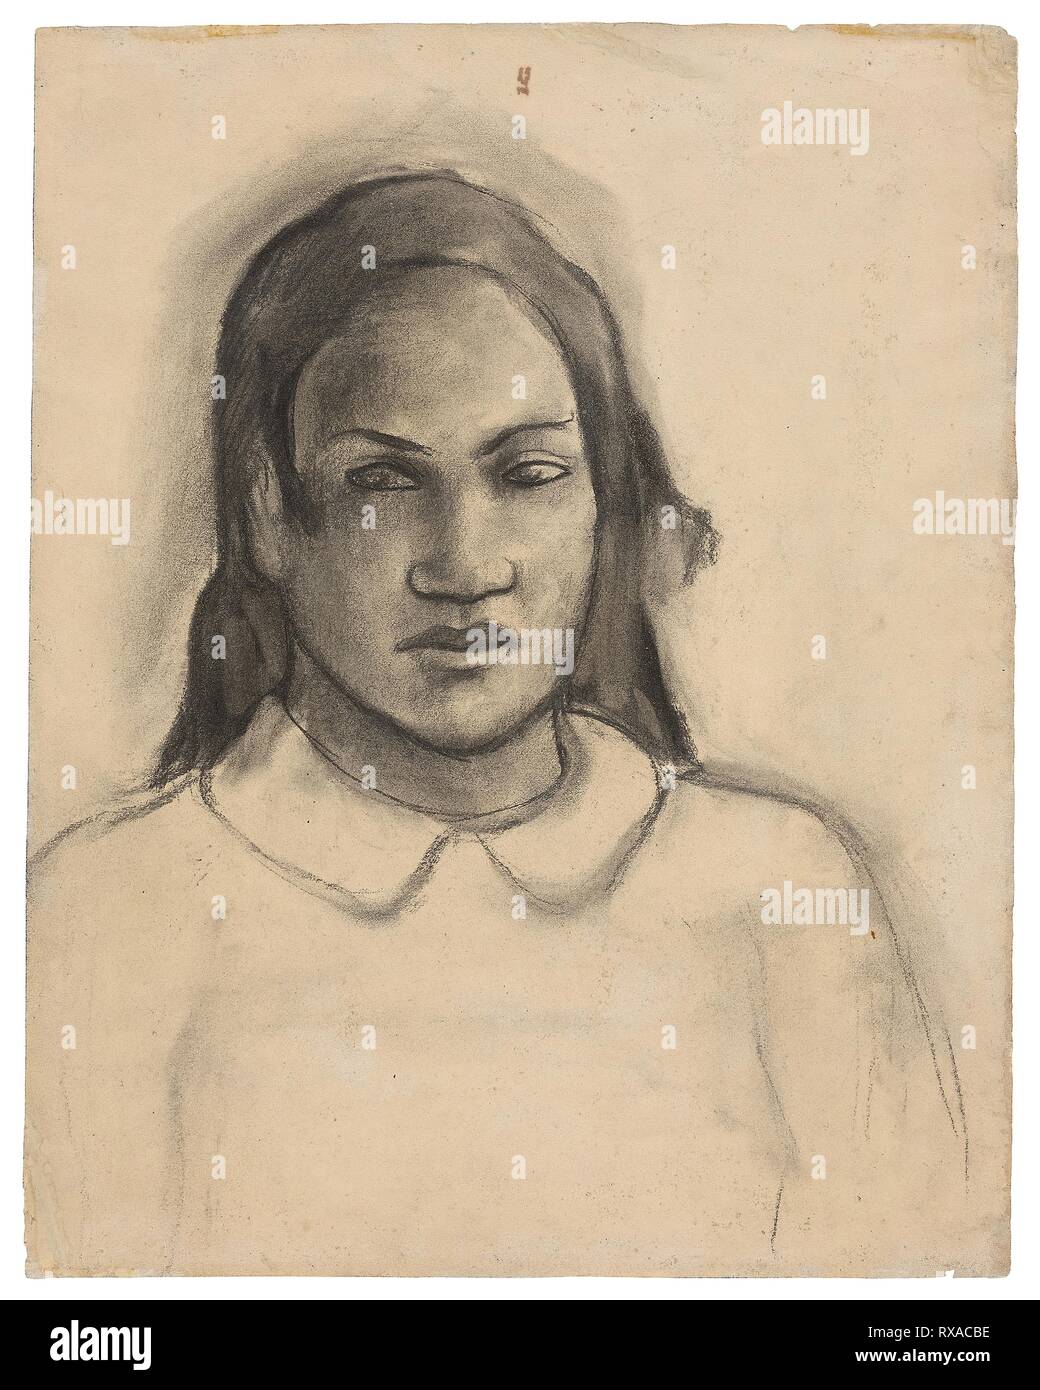 Portrait of Tehamana. Paul Gauguin; French, 1848-1903. Date: 1891-1893. Dimensions: 413 × 325 mm. Charcoal and wetted charcoal, with stumping and erasing, on cream wove paper, selectively fixedr. Origin: France. Museum: The Chicago Art Institute. Stock Photo